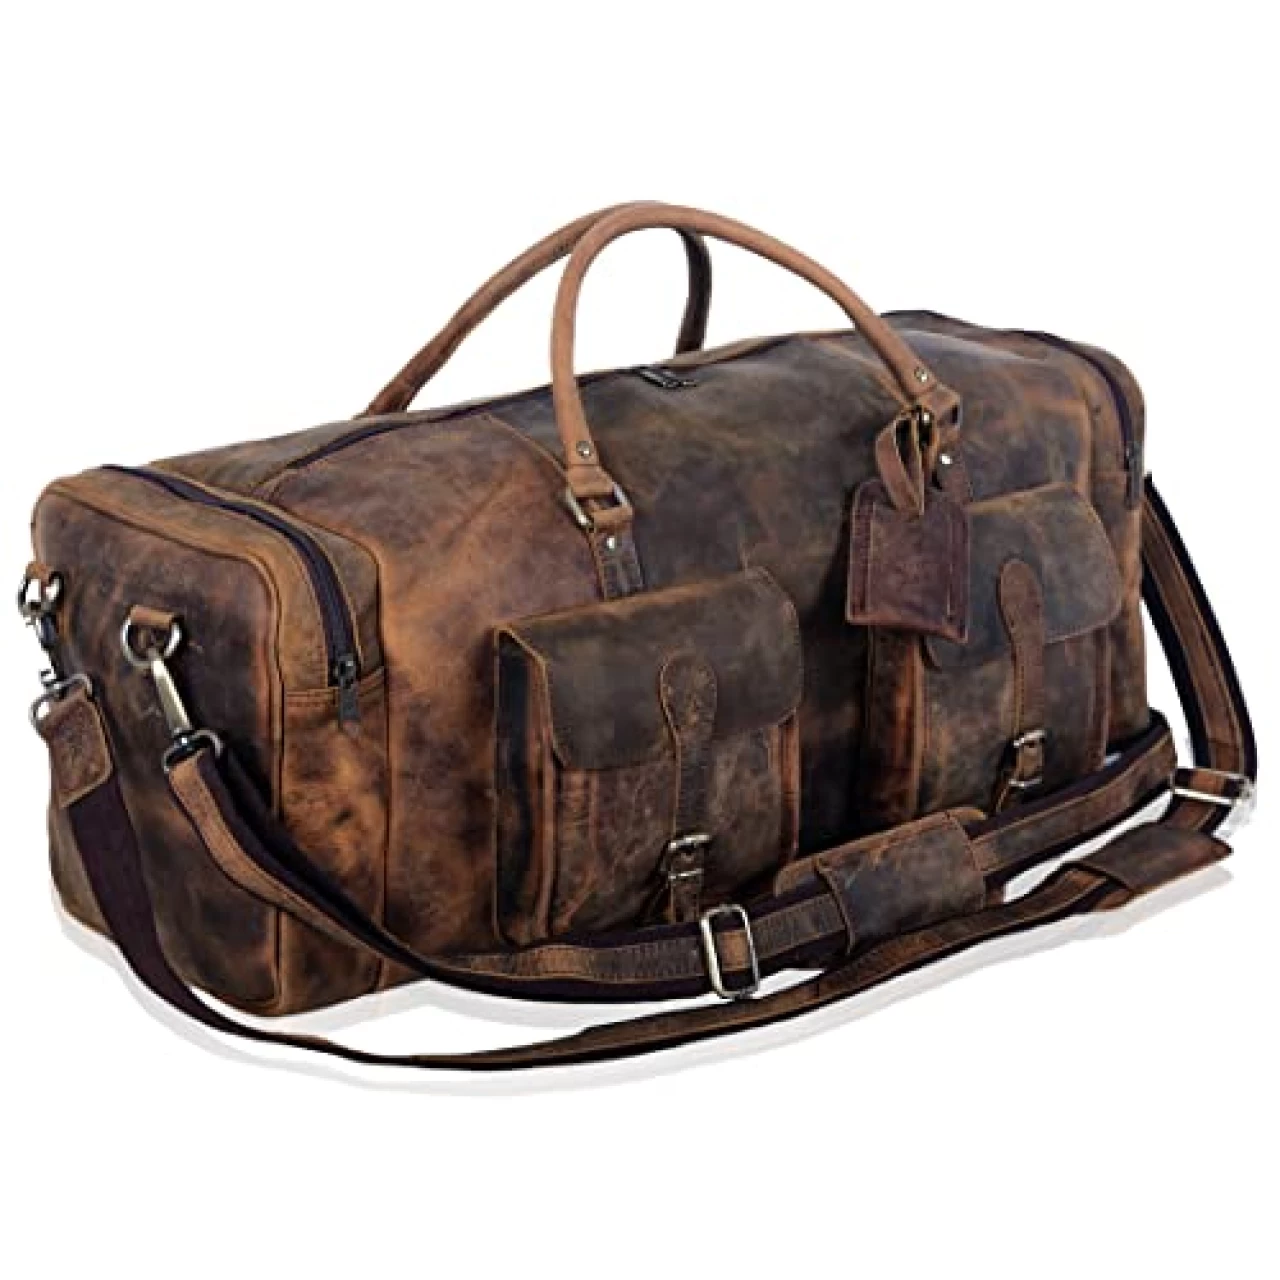 KomalC 28 inch Duffel Bag Travel Sports Overnight Weekend Leather Duffle Bag for Gym Sports Cabin Holdall bag (Distressed Brown)